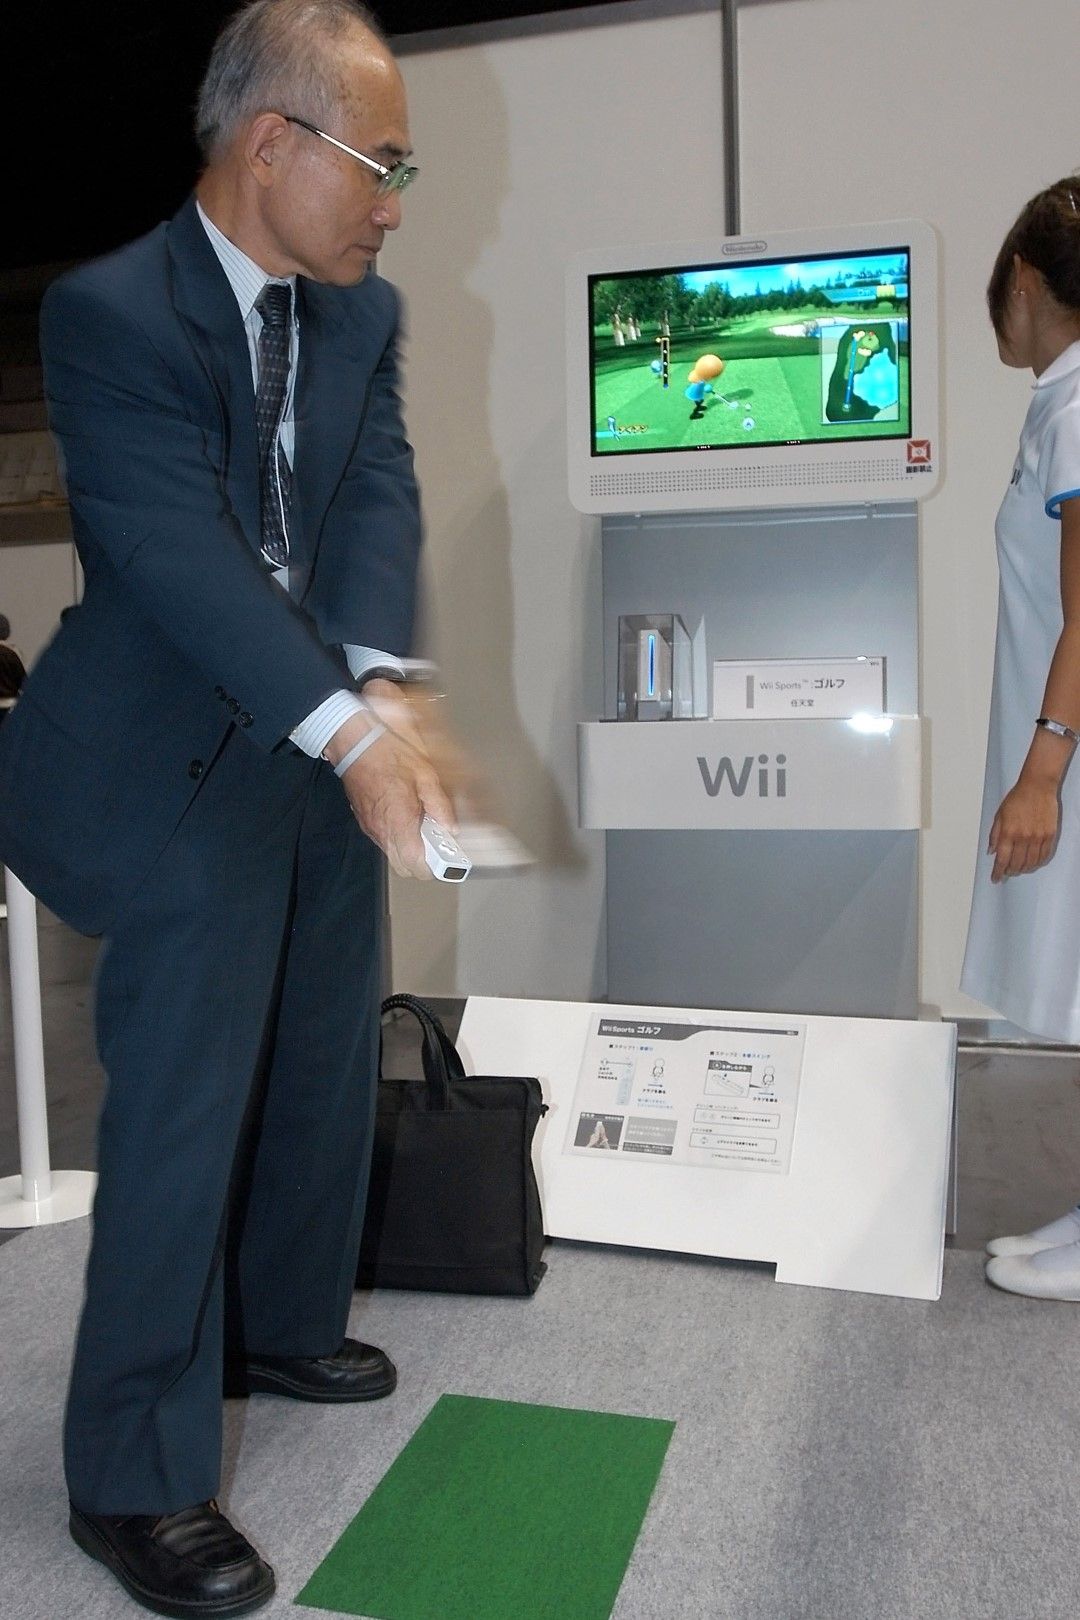 10 years later, the Wii U is still deeply weird—and we love it